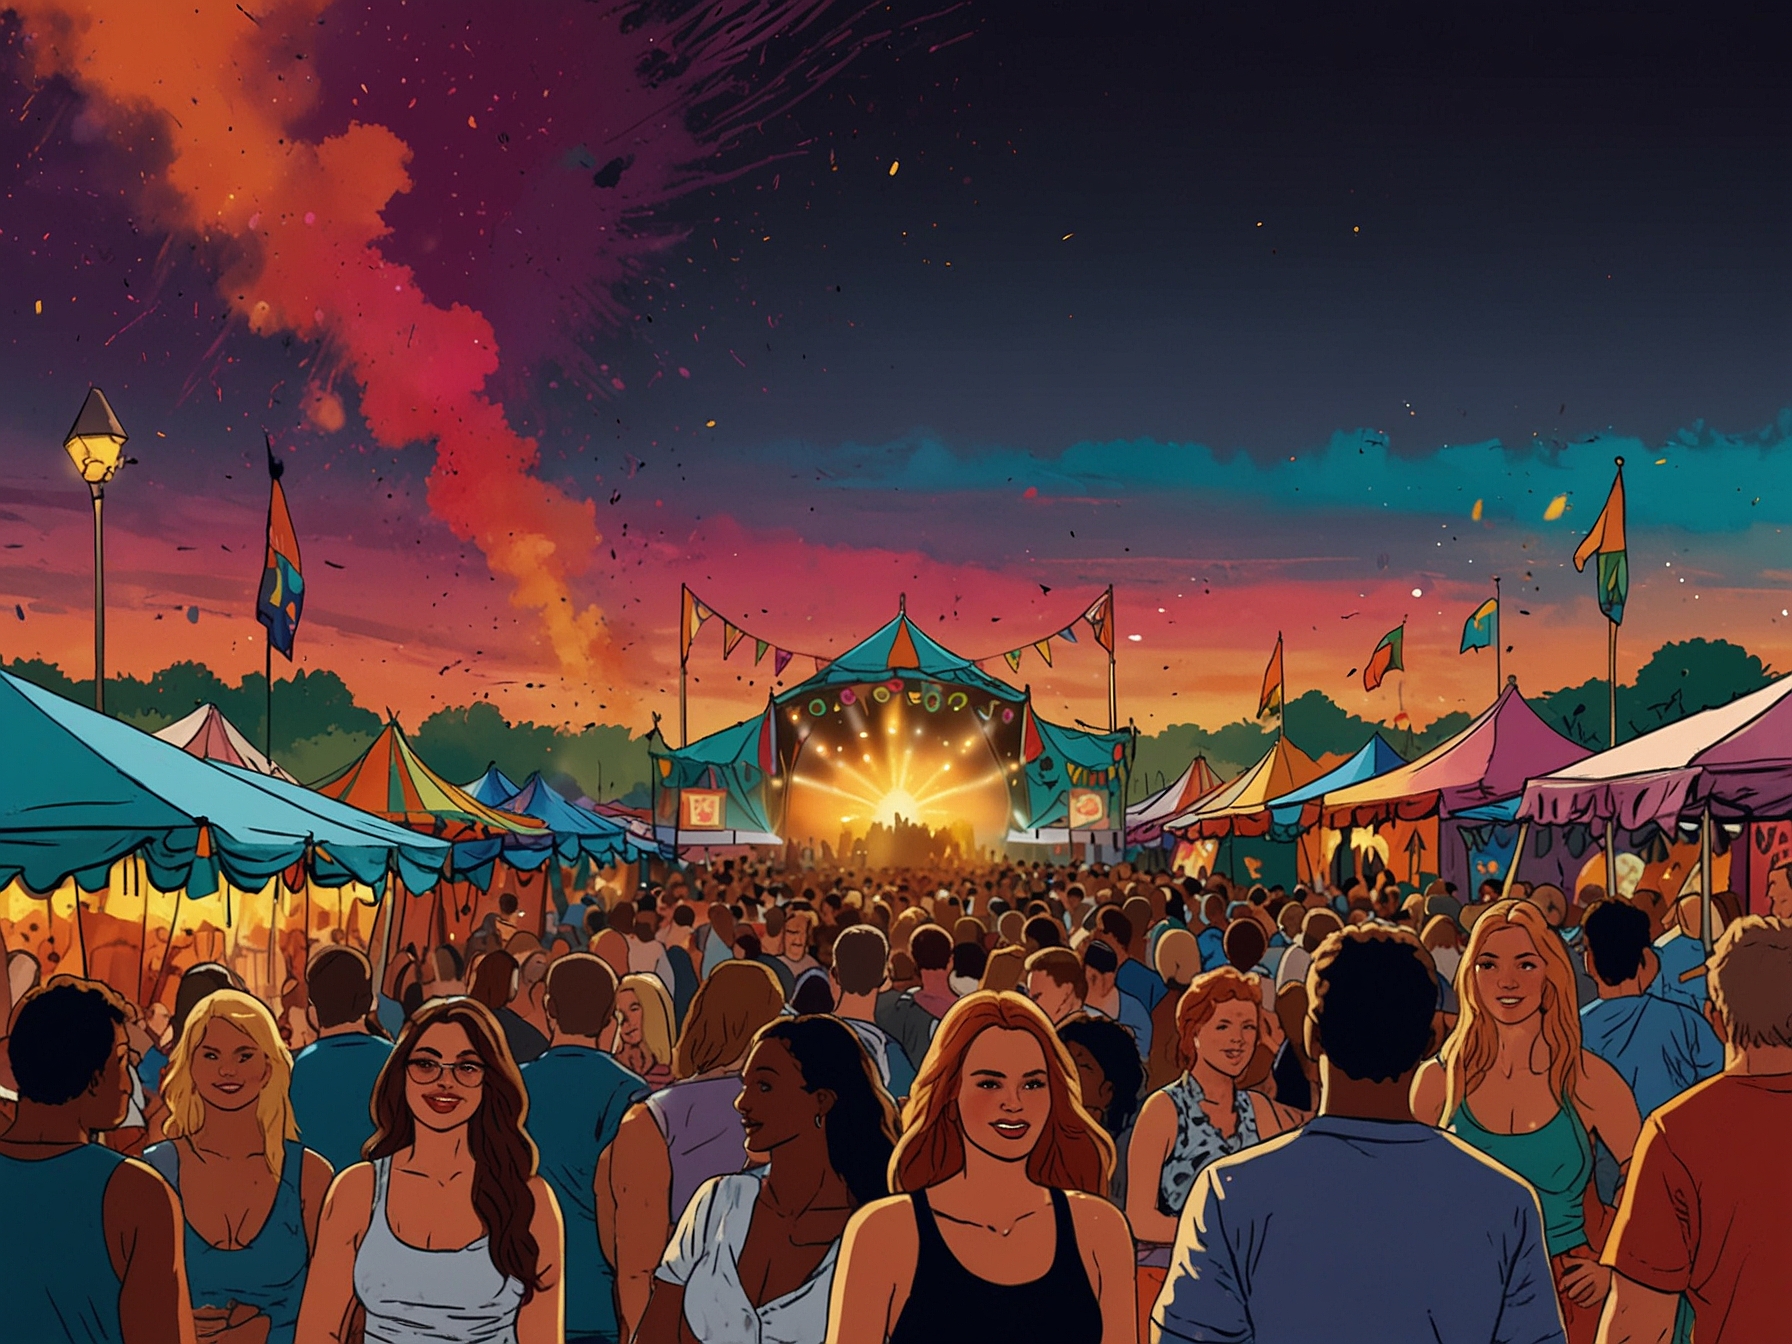 The bustling Glastonbury festival grounds with fans and celebrities like Maya Jama, showcasing the event’s vibrant atmosphere and diverse mix of entertainment.